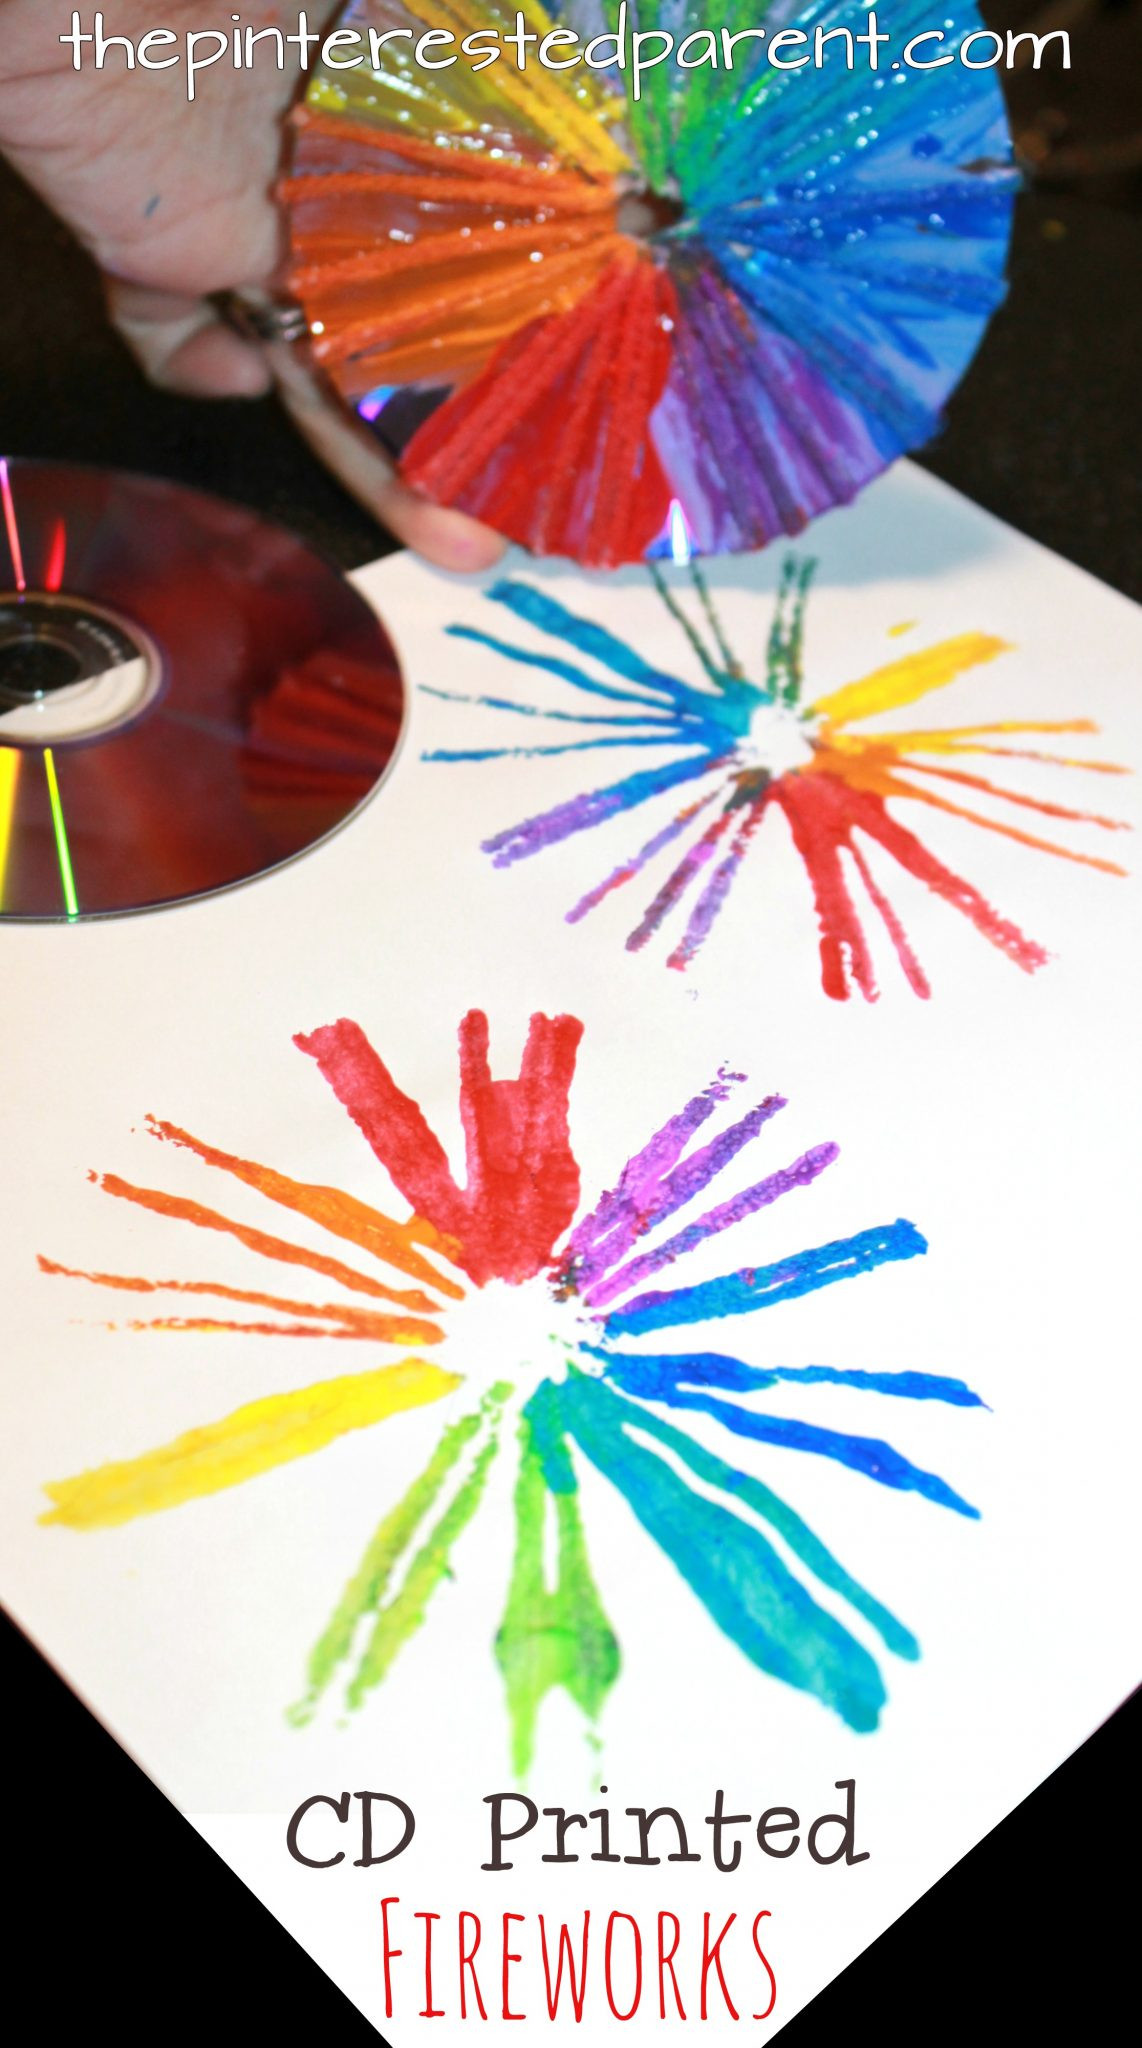 Preschoolers Art And Craft
 Printmaking With Cds For Kids – The Pinterested Parent